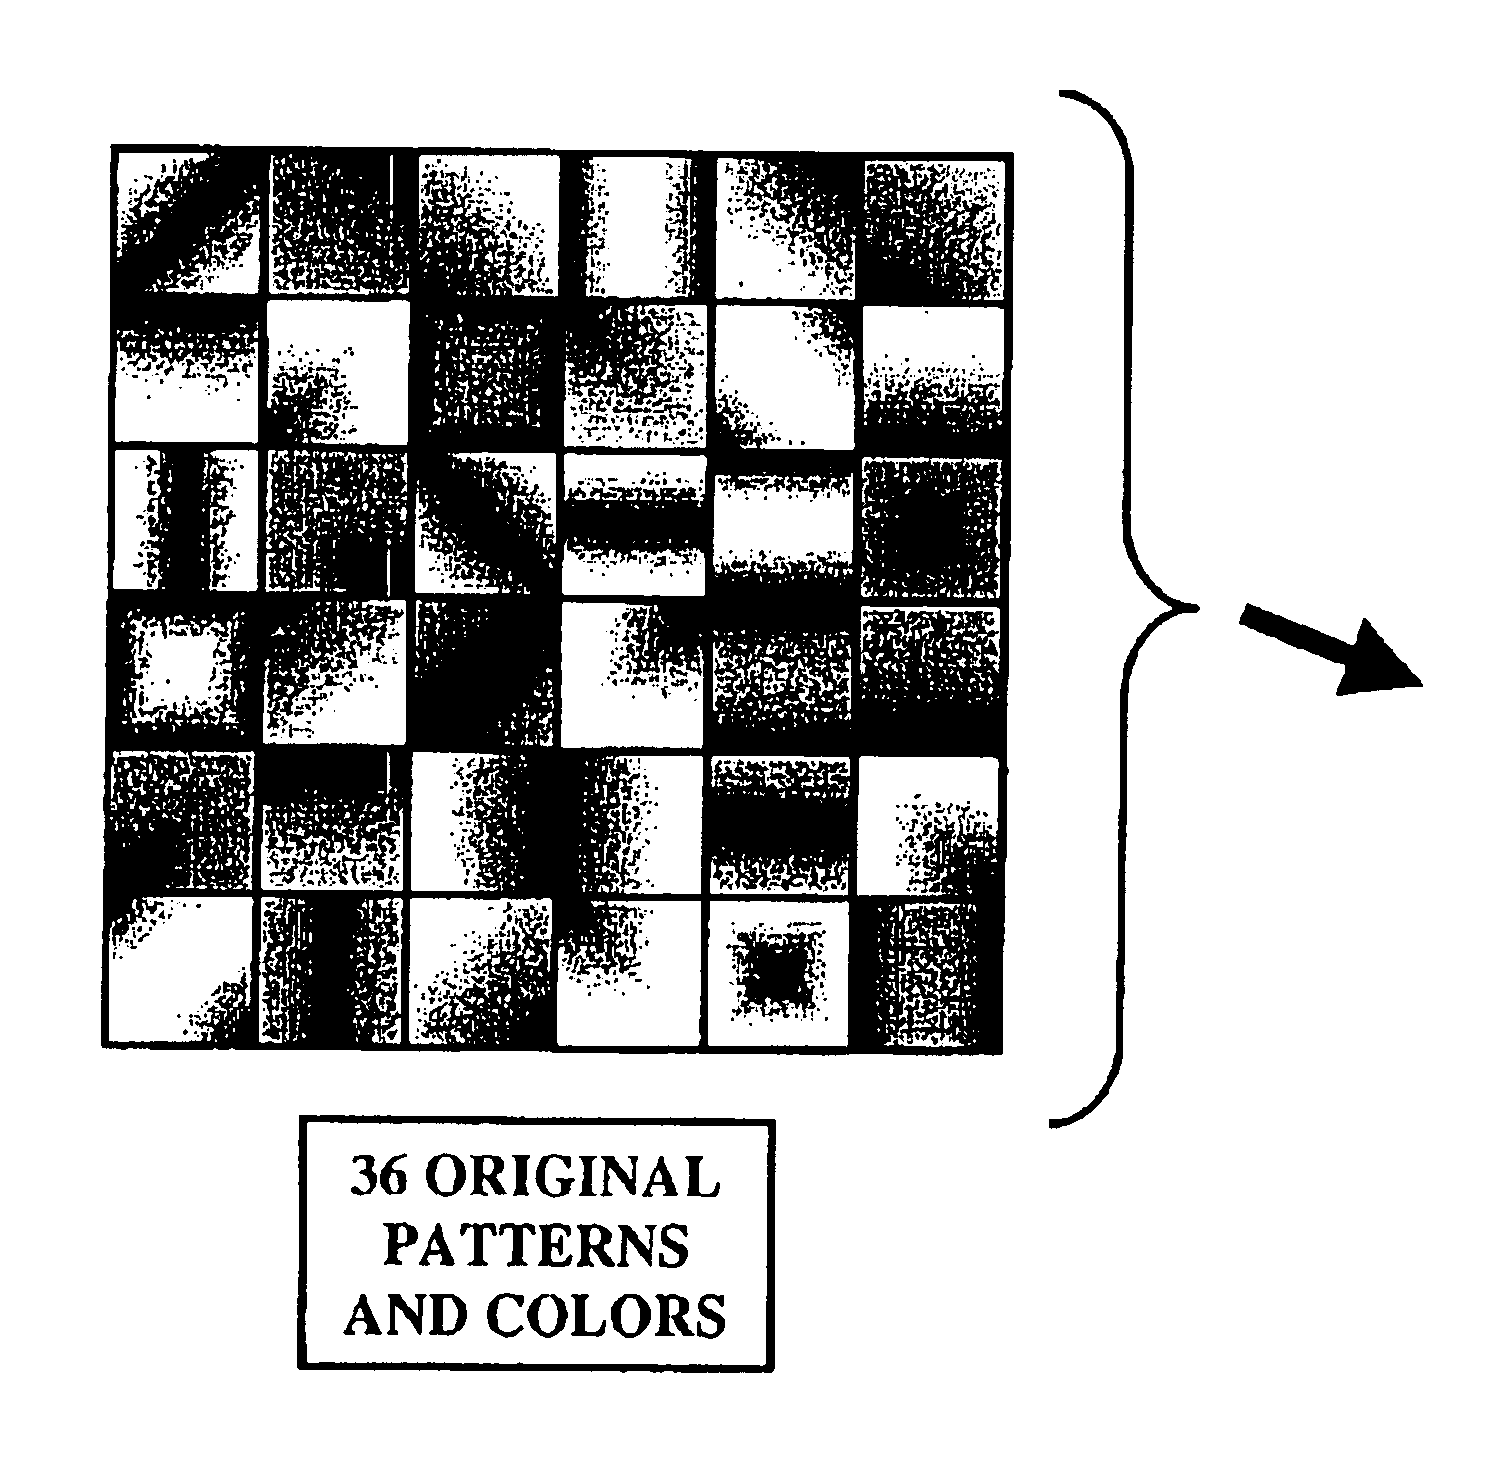 Method of patterning, installing, renewing and/or recycling carpet tiles